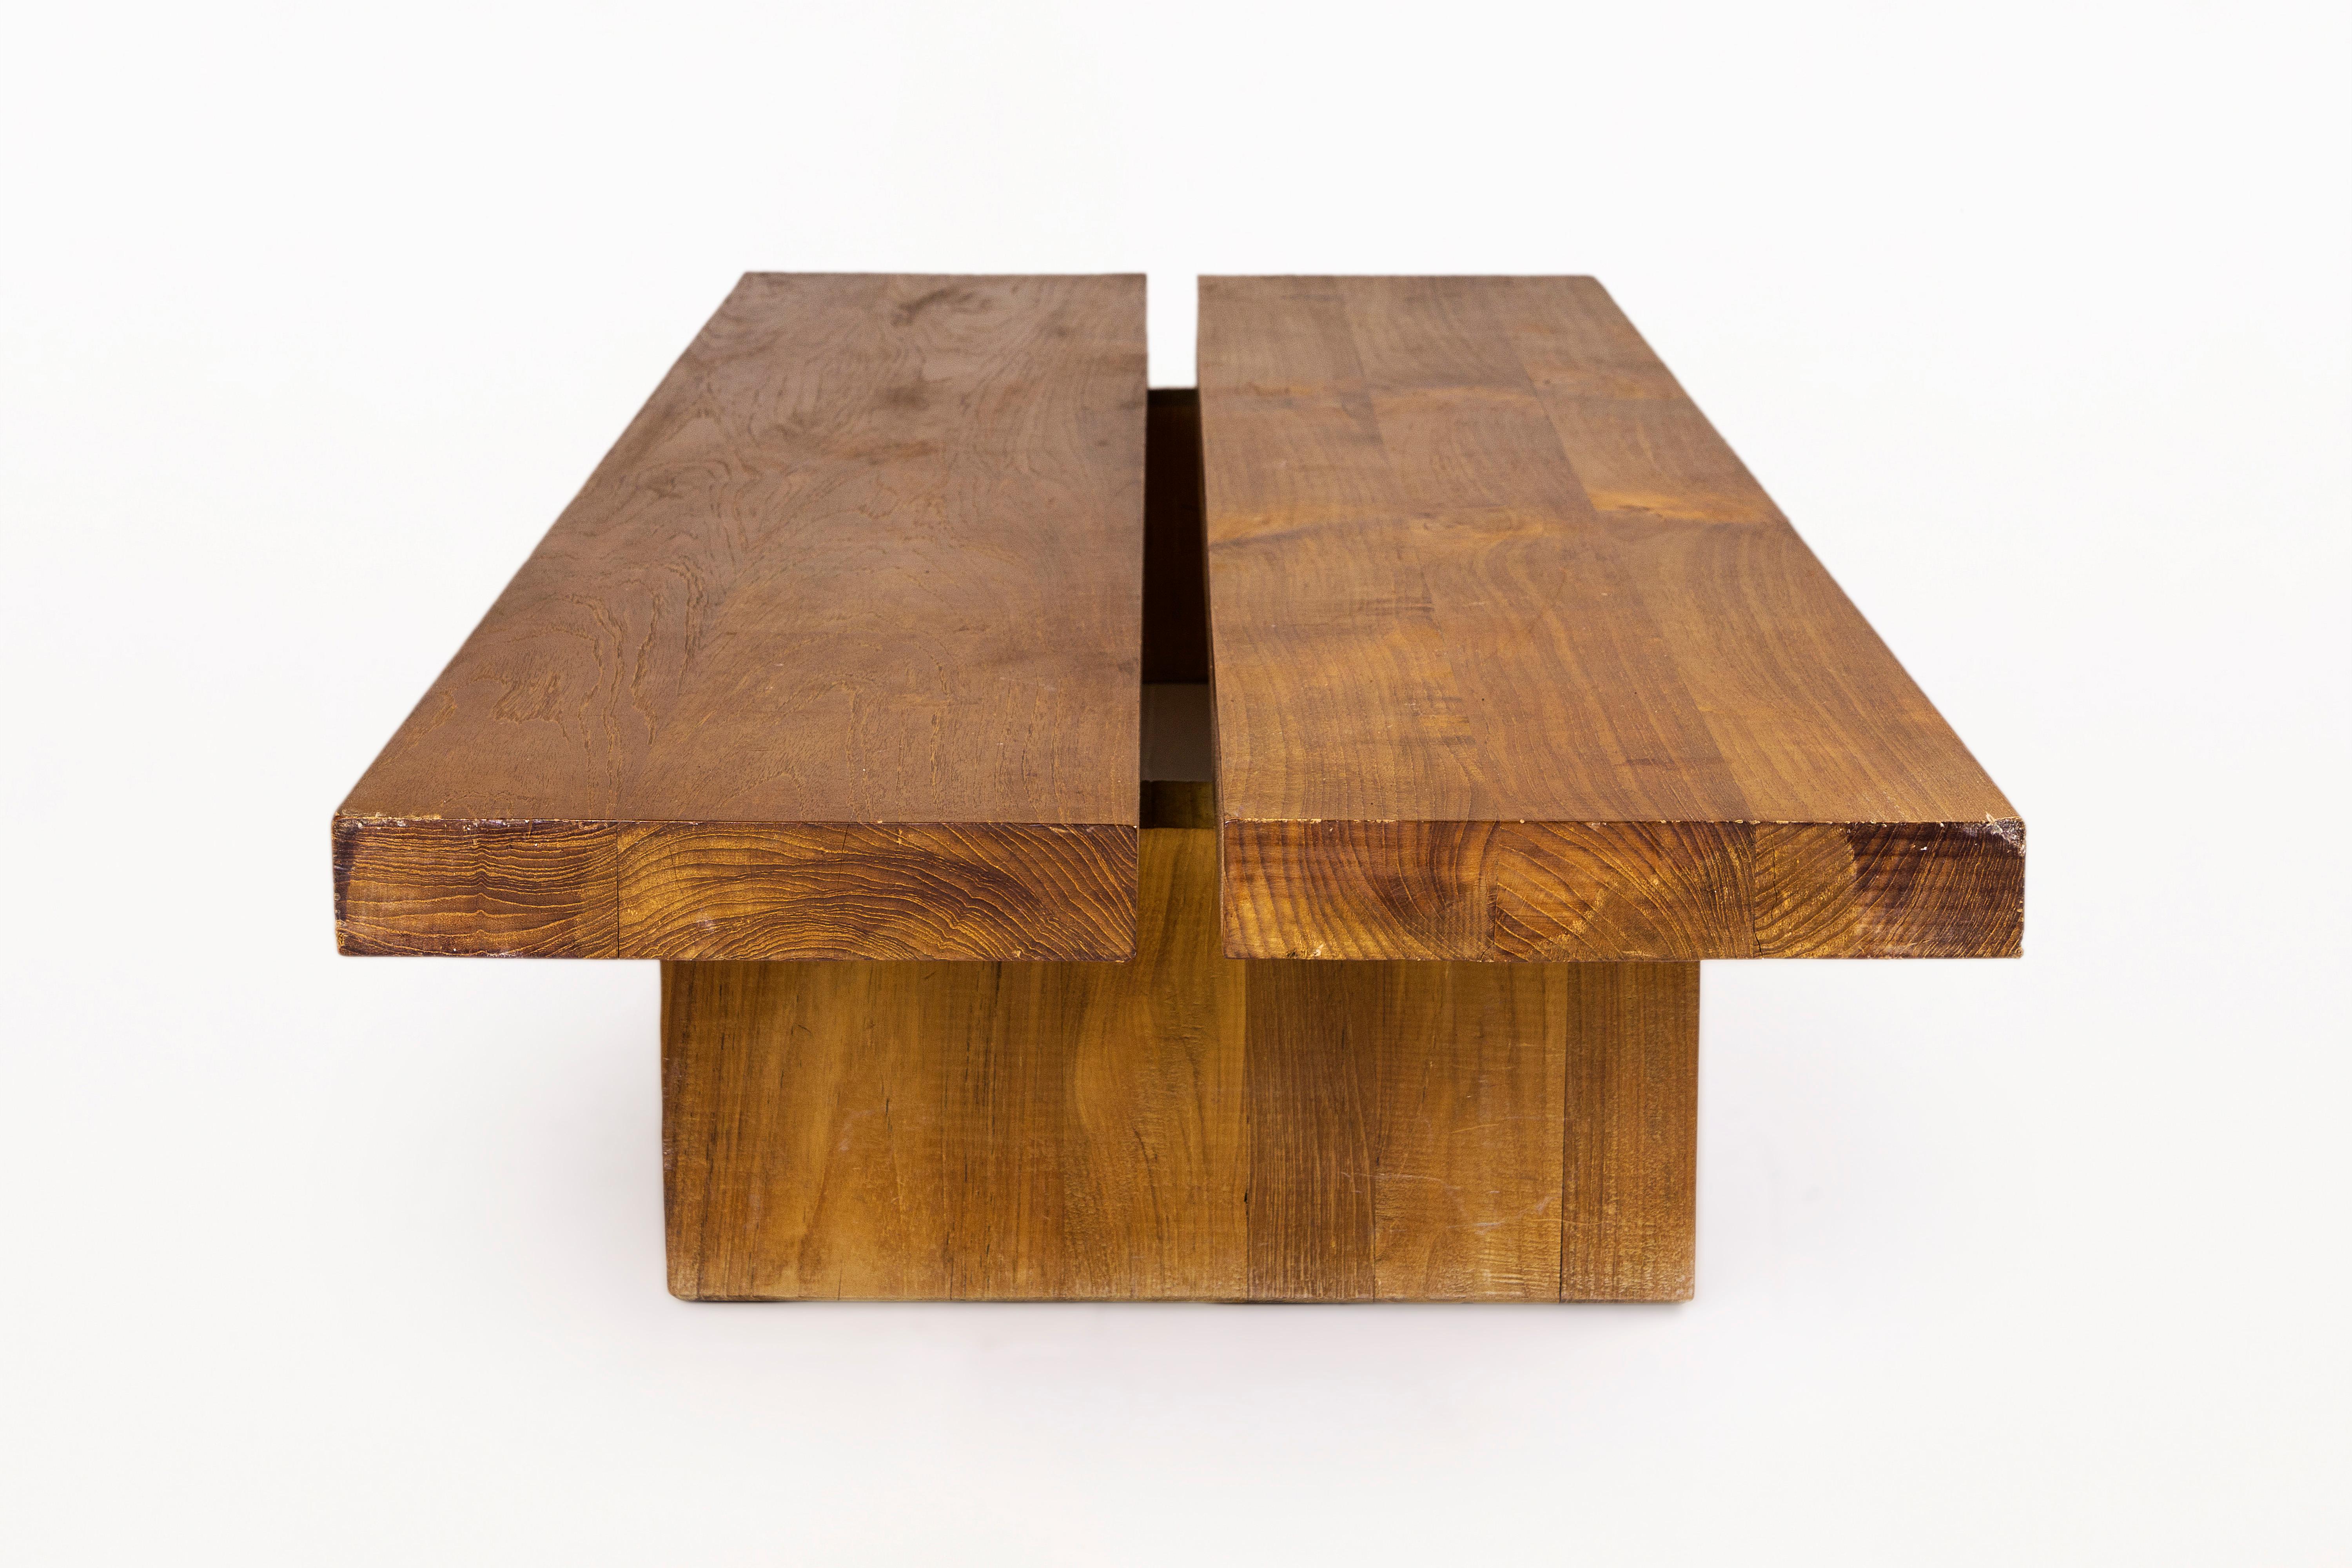 Walnut coffee table
tabletop divided in two long pieces, simulating two parallel rectangles.
circa 1960, France
Very good vintage condition.